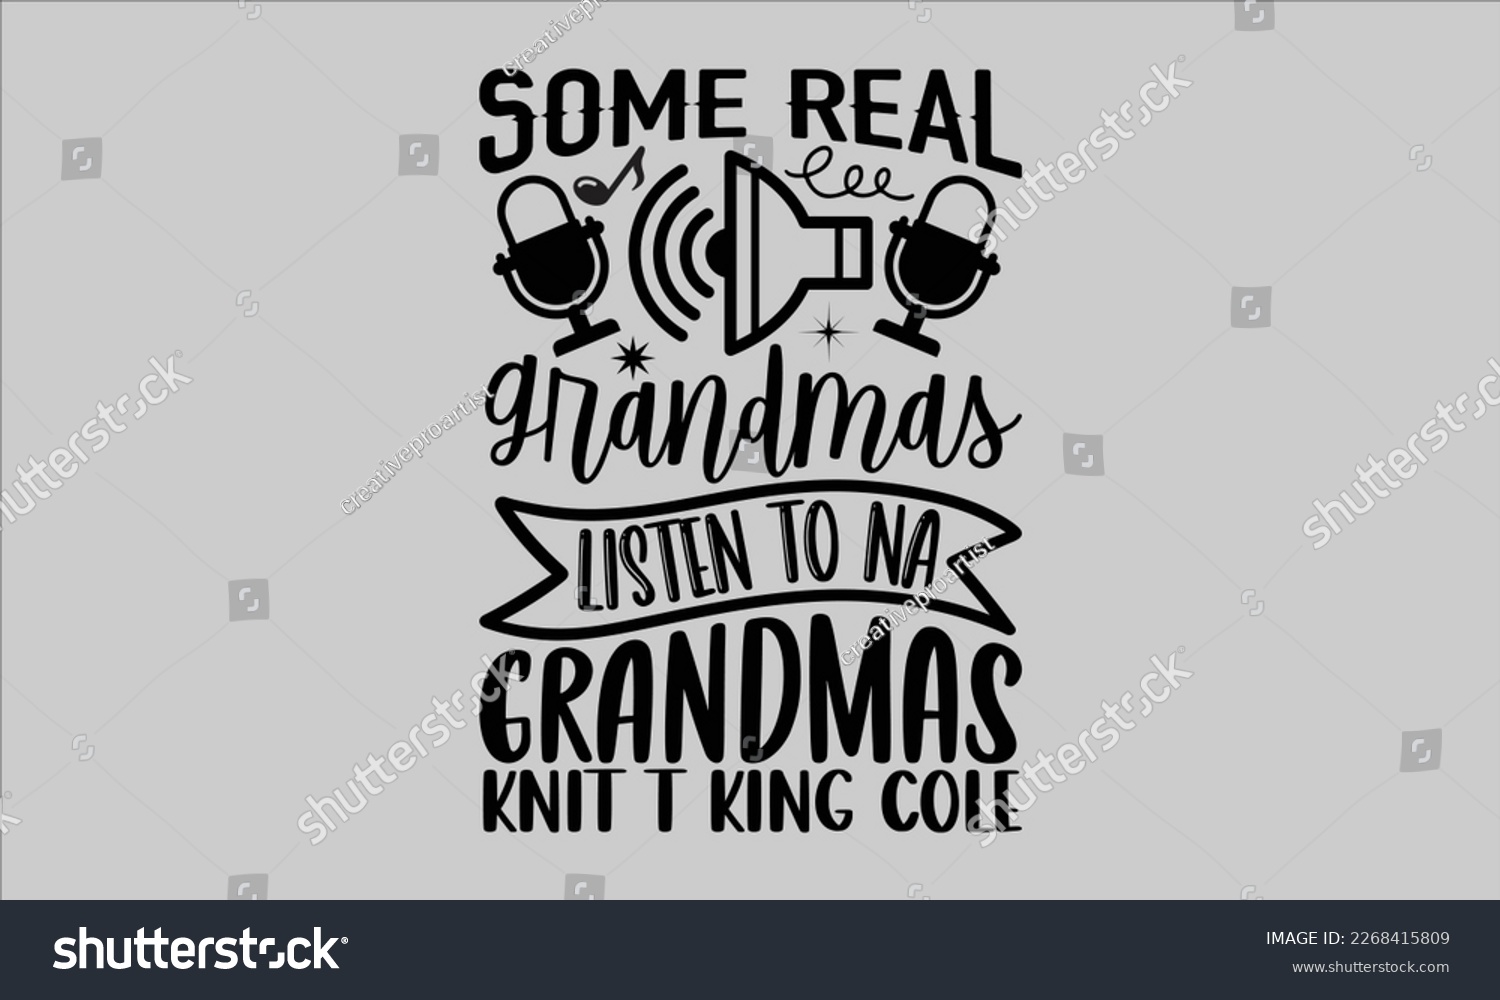 SVG of Some Real grandmas listen to na grandmas knit t king cole- Piano t- shirt design, Template Vector and Sports illustration, lettering on a white background for svg Cutting Machine, posters mog, bags ep svg